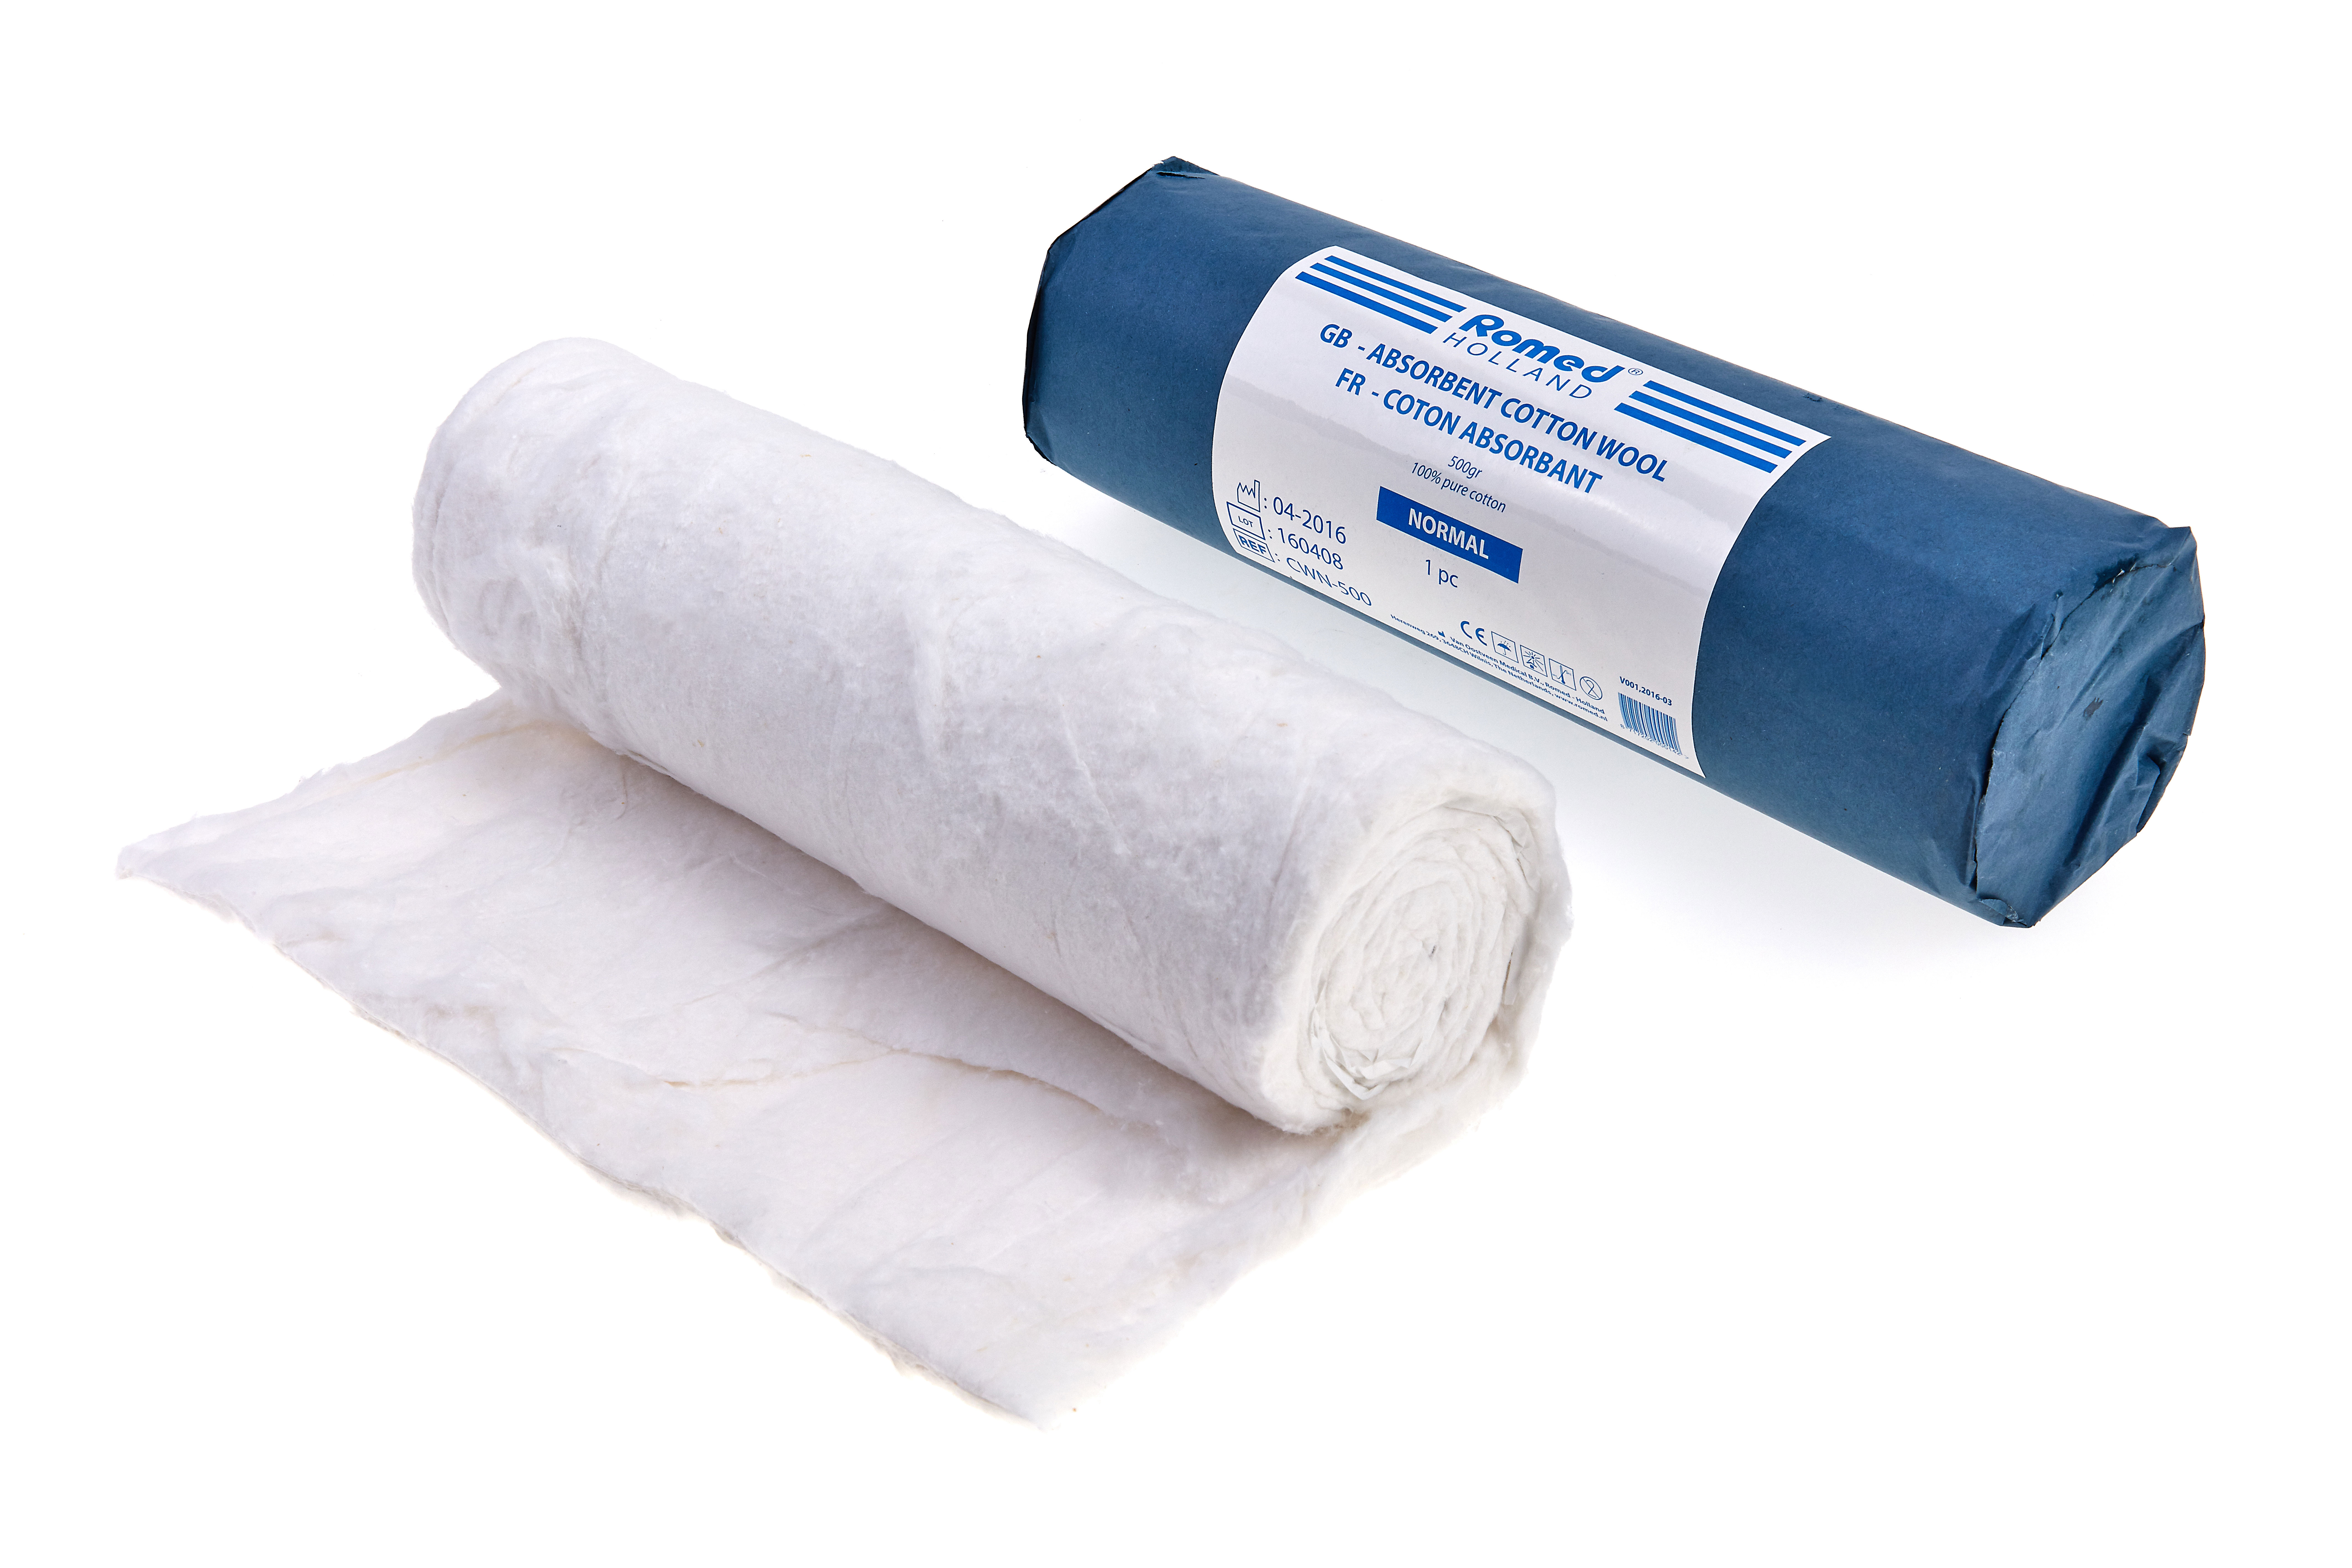 CWN-500 Romed absorbent cotton wool, 500 gr., degreased and bleached, 100% pure cotton, per piece, 30 rolls in a carton.